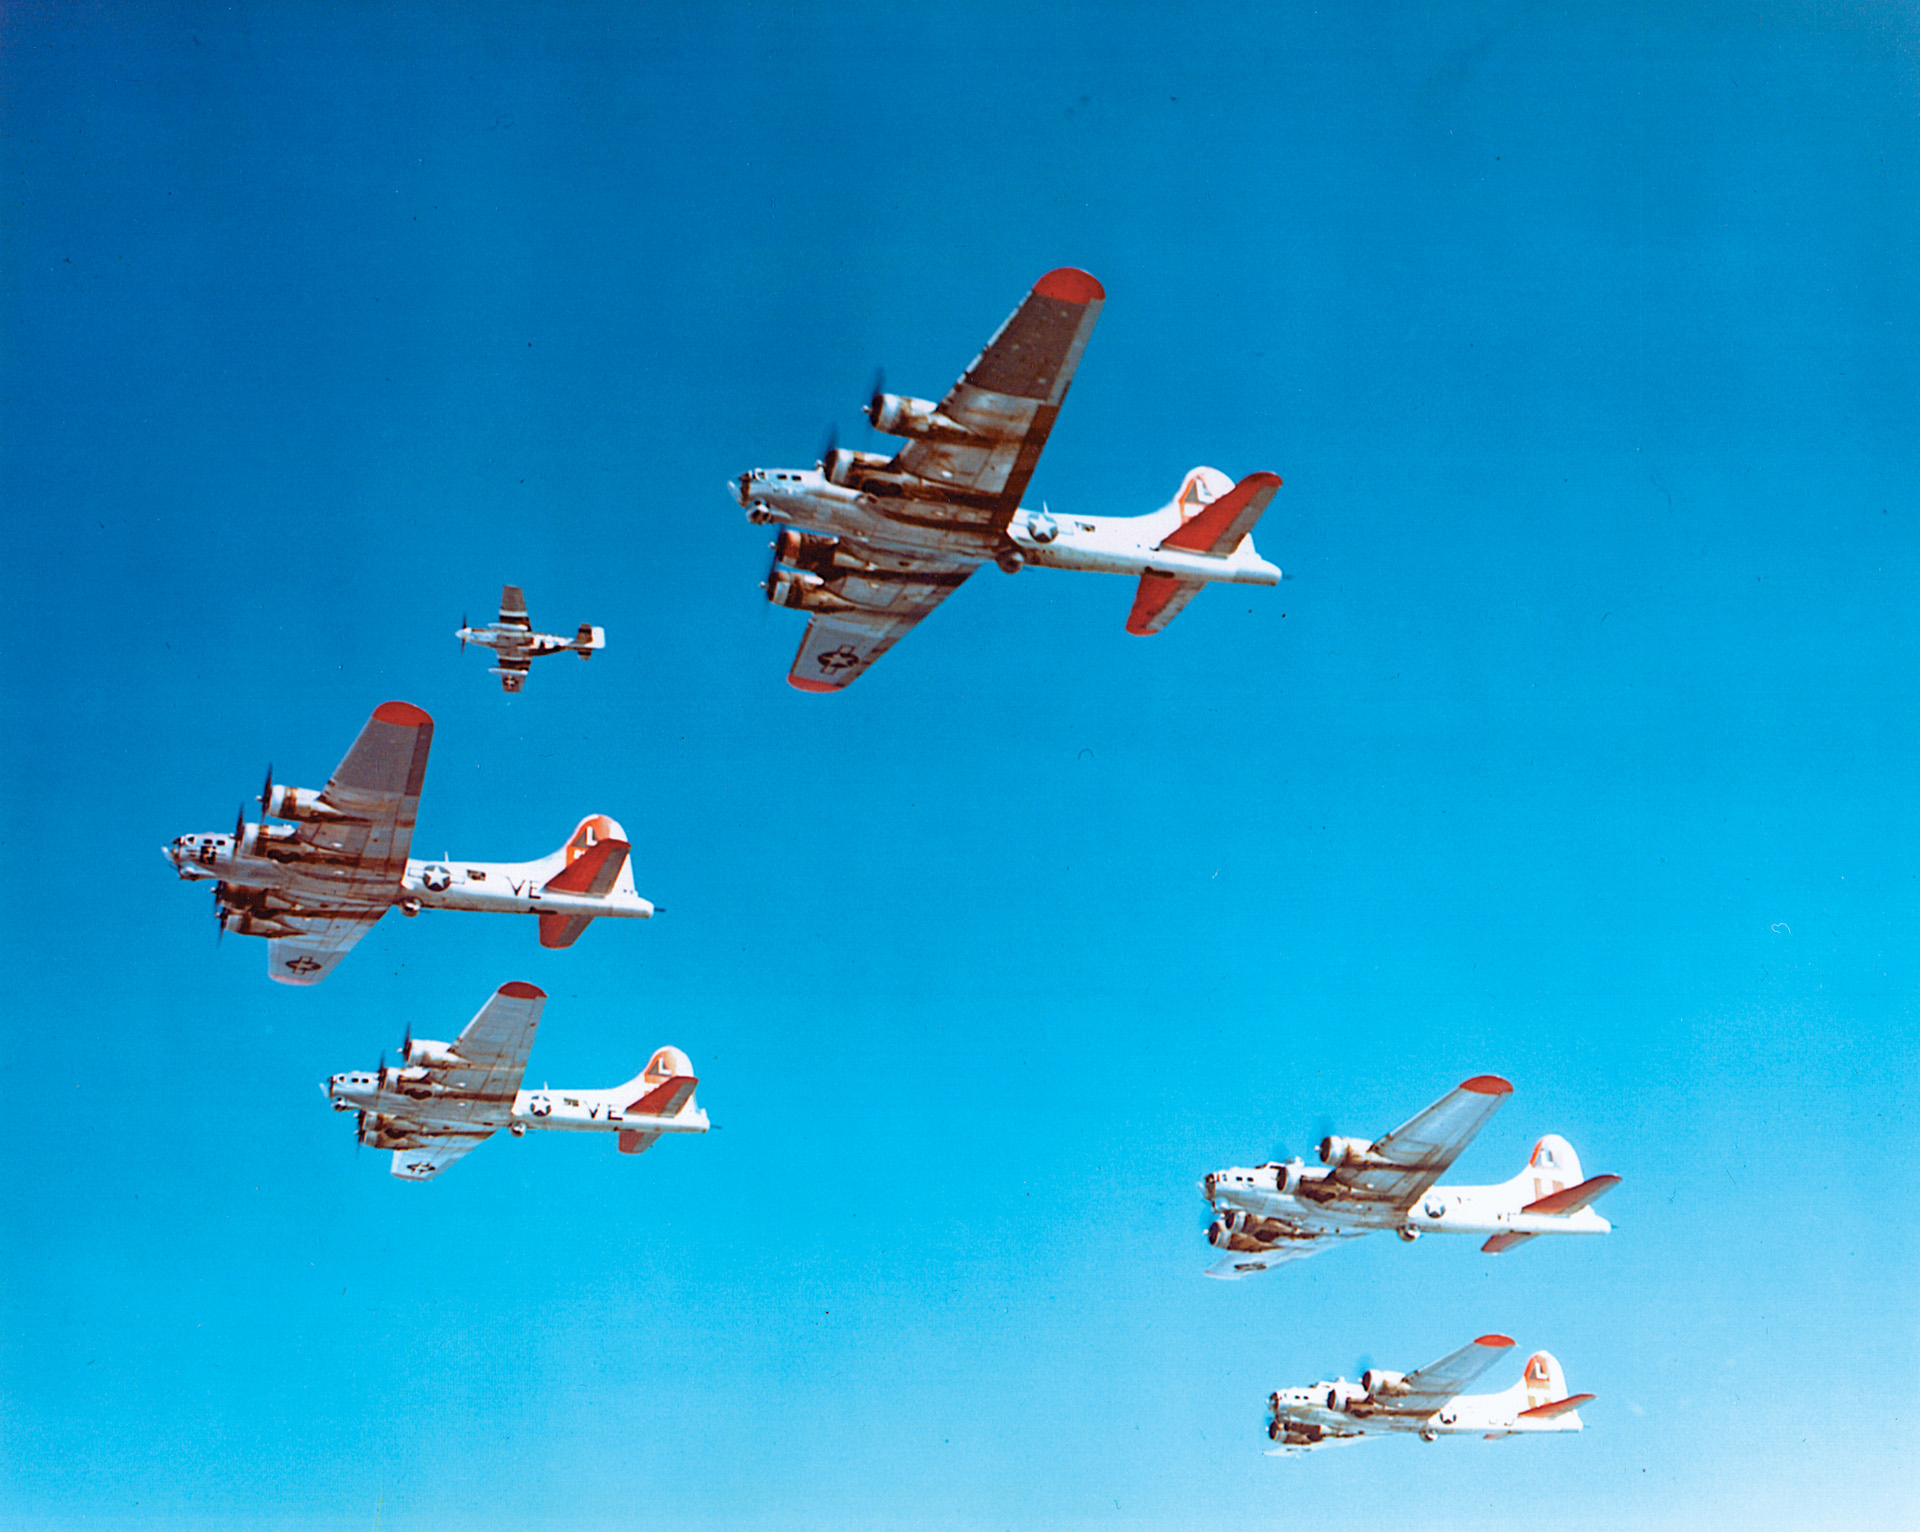 A P-51 Mustang fighter, upper left, flies escort duty with a formation of B-17 Flying Fortress bombers. The marriage of the North American airframe design and the Rolls-Royce Merlin engine produced a high-performance fighter that was originally conceived as a dive bomber powered by an Allison engine.